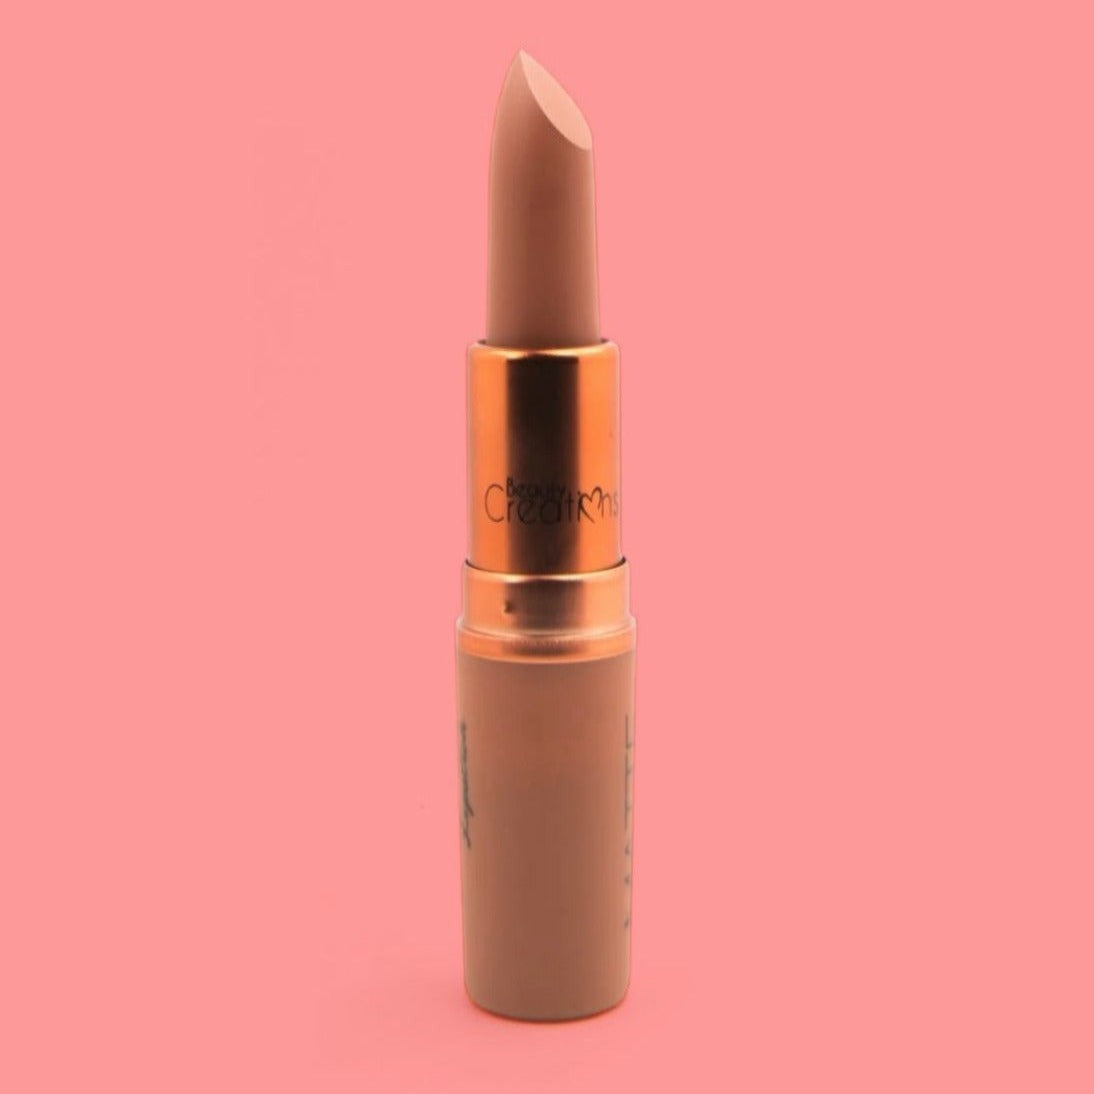 'Totally Nude' - LS12 Lipstick